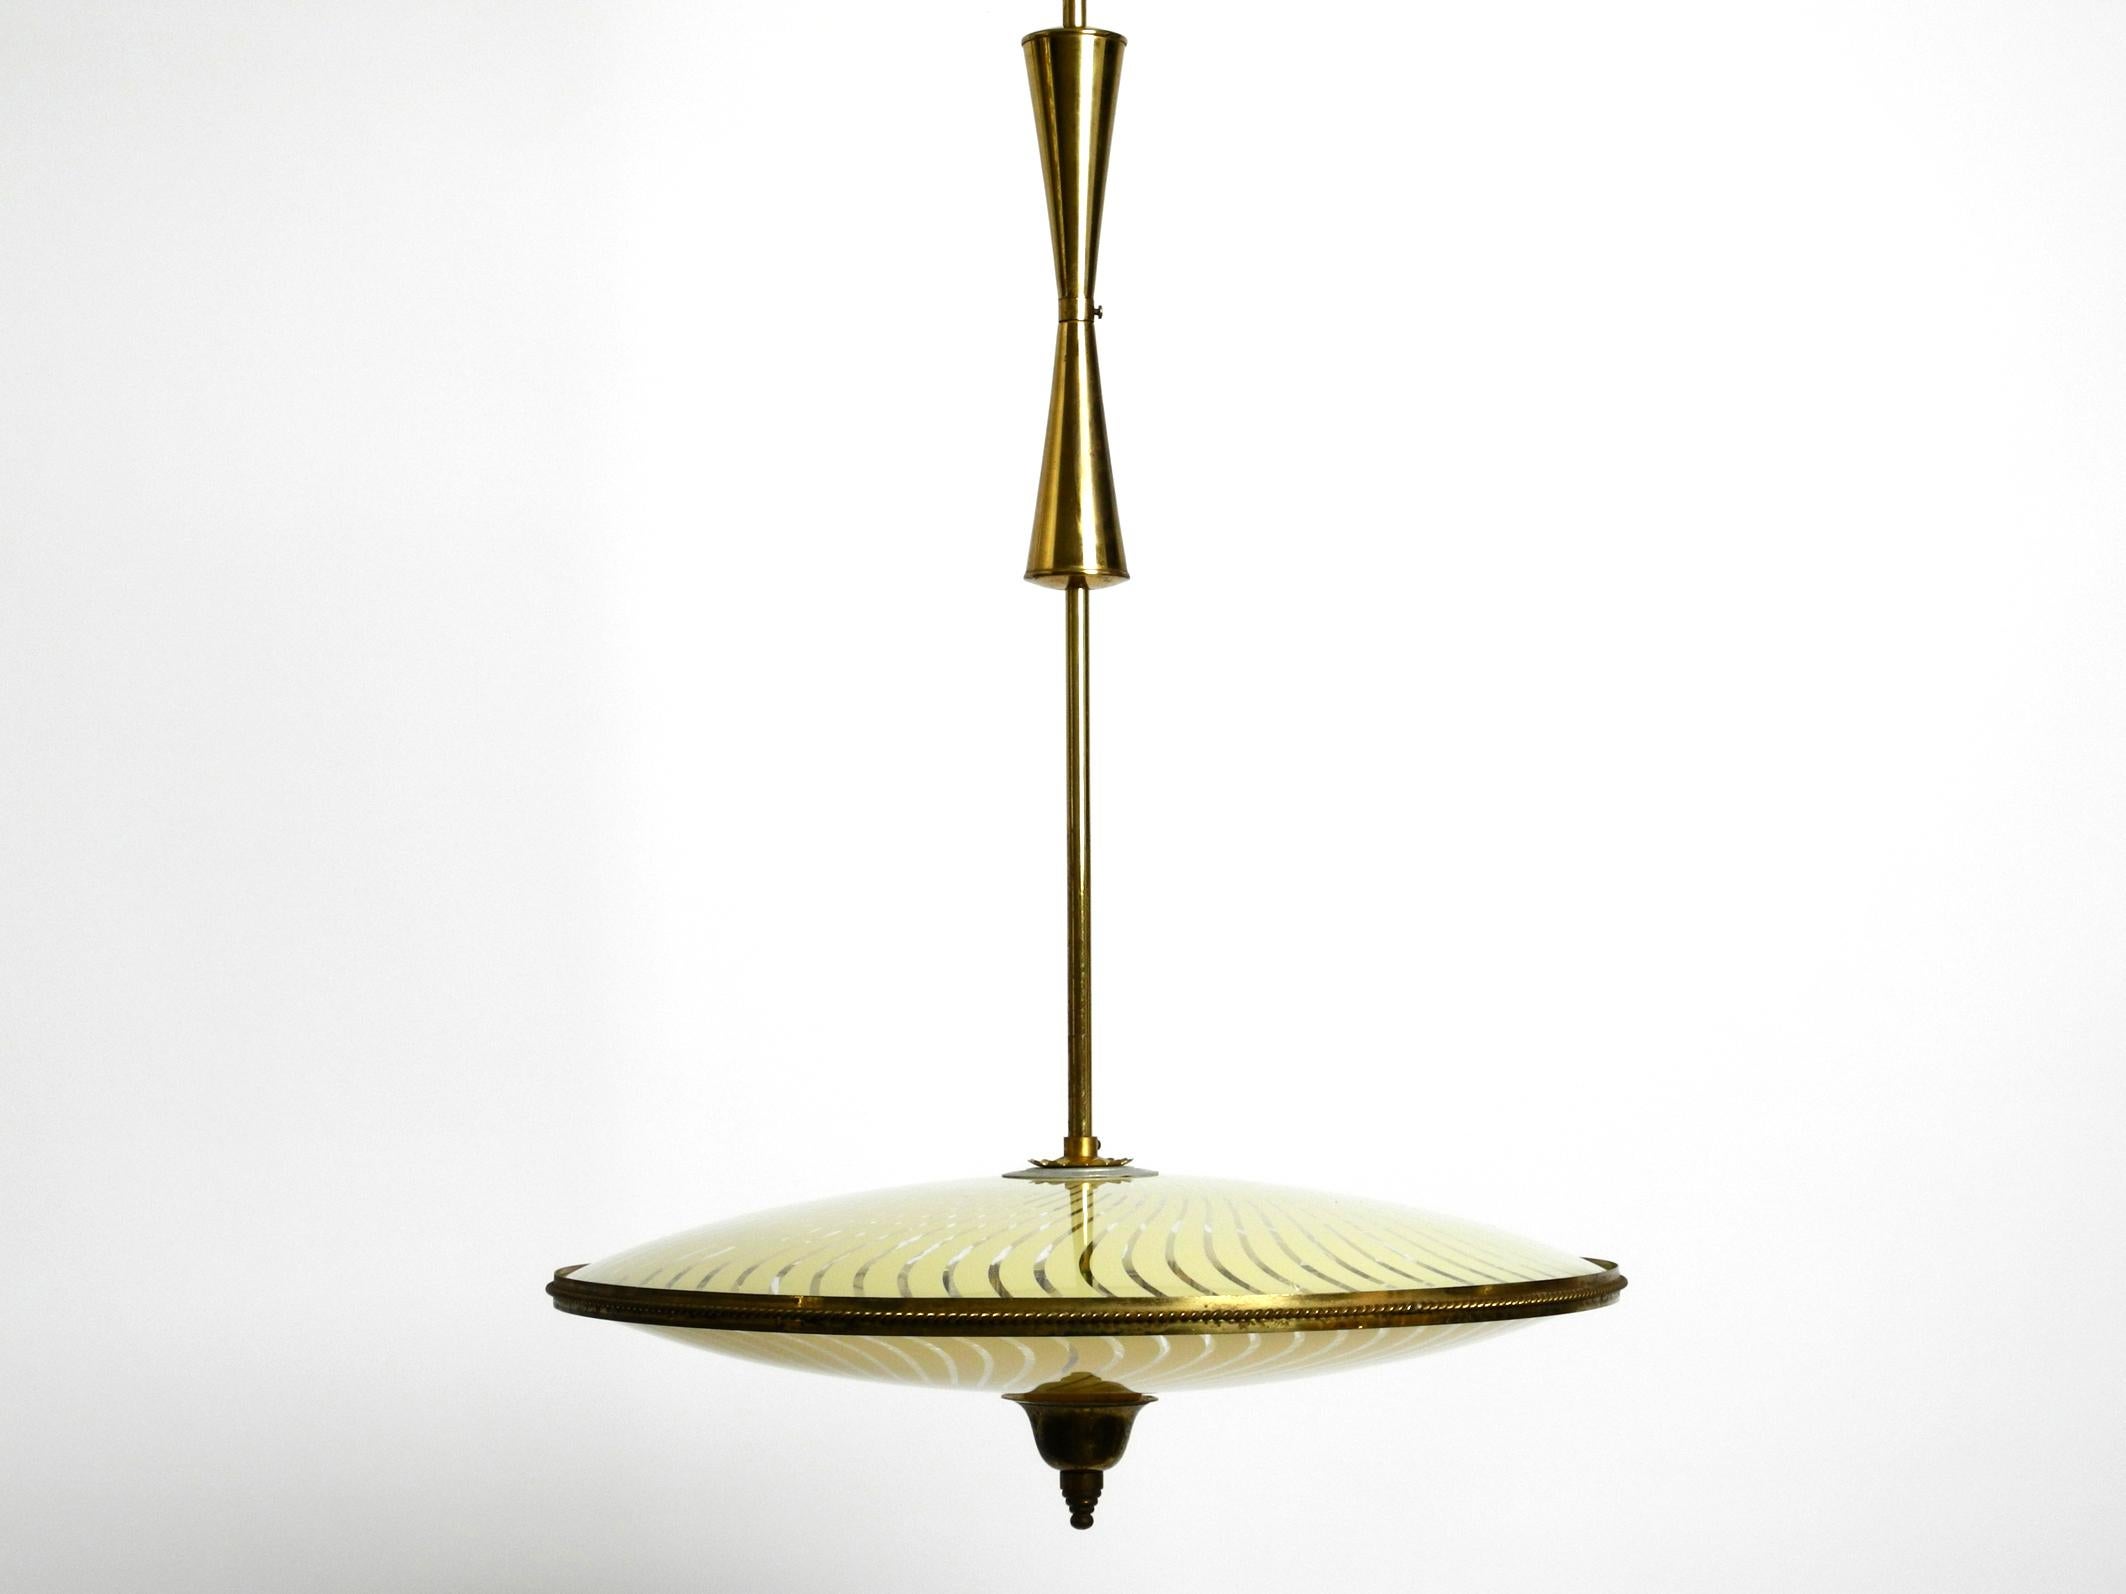 Beautiful Italian mid century brass ceiling lamp with an elegant double glass shade.
Great rare Italian design of the 1950's.
Frame, rod and canopy are made entirely of brass.
The identical shades above and below are made of glass with yellow